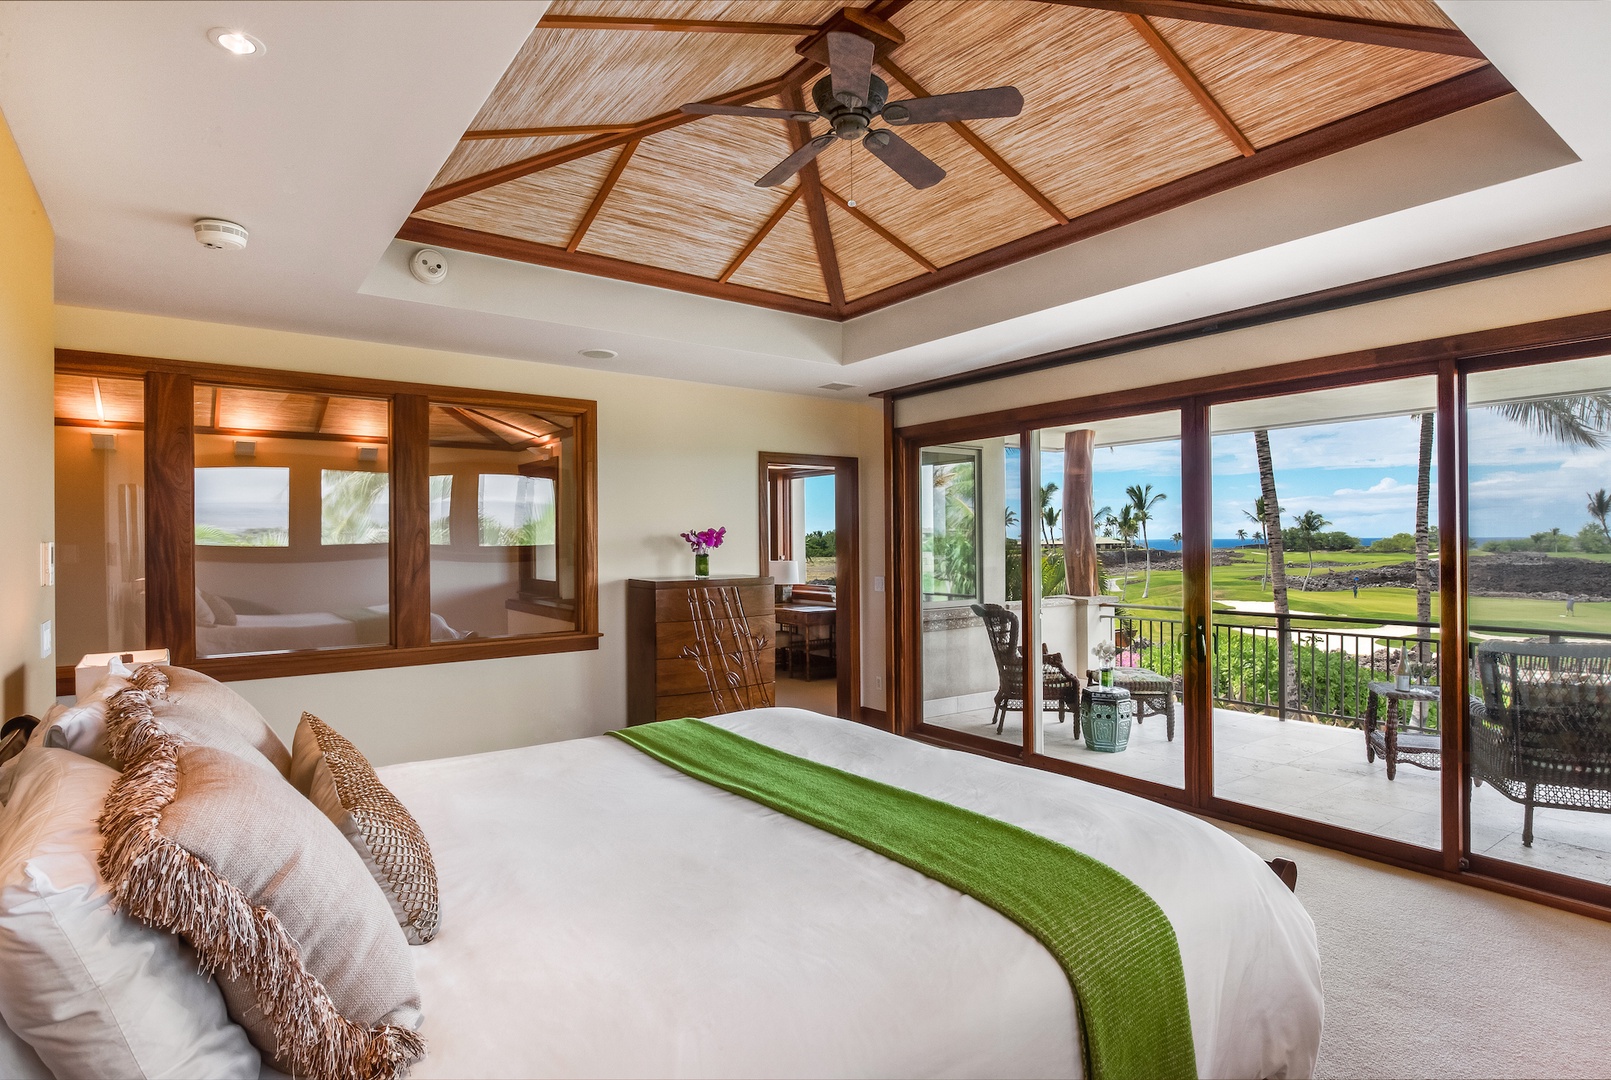 Kamuela Vacation Rentals, 3BD OneOcean (1C) at Mauna Lani Resort - Upstairs Primary Commands the Entire Second Floor w/ Separate Office Space w/ Twin Daybed, Electronic Pocket Doors Open to Private Lanai Overlooking Pool Garden, Golf Course and Out to Ocean